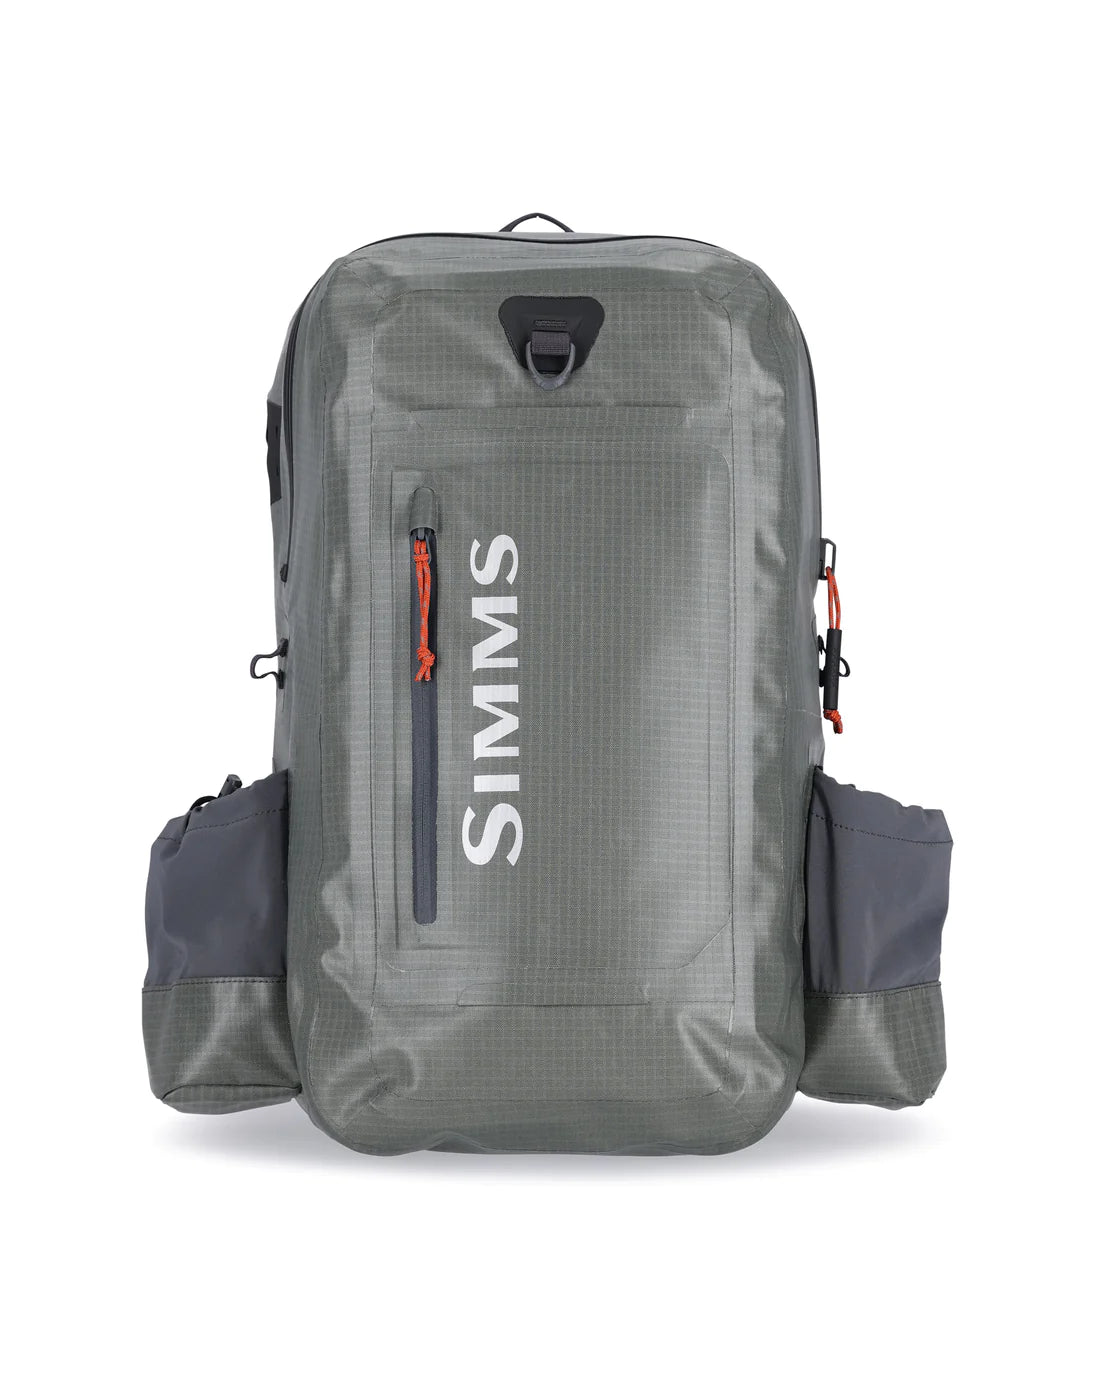 2022 SIMMS Dry Creek Z Backpack Review